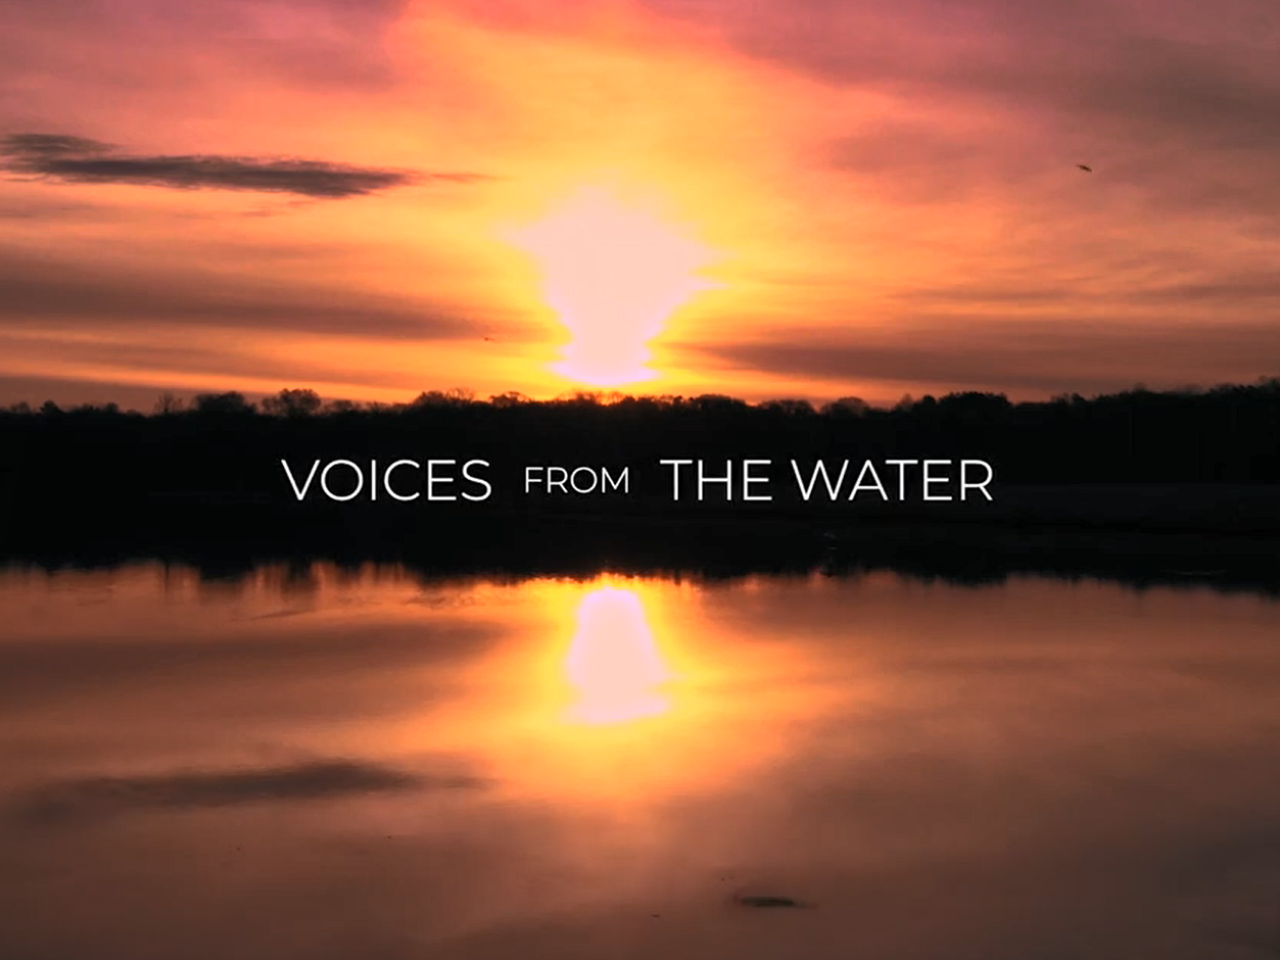 "Voices from the water" on a background of an expanse of water reflecting trees on a horizon at sunset.